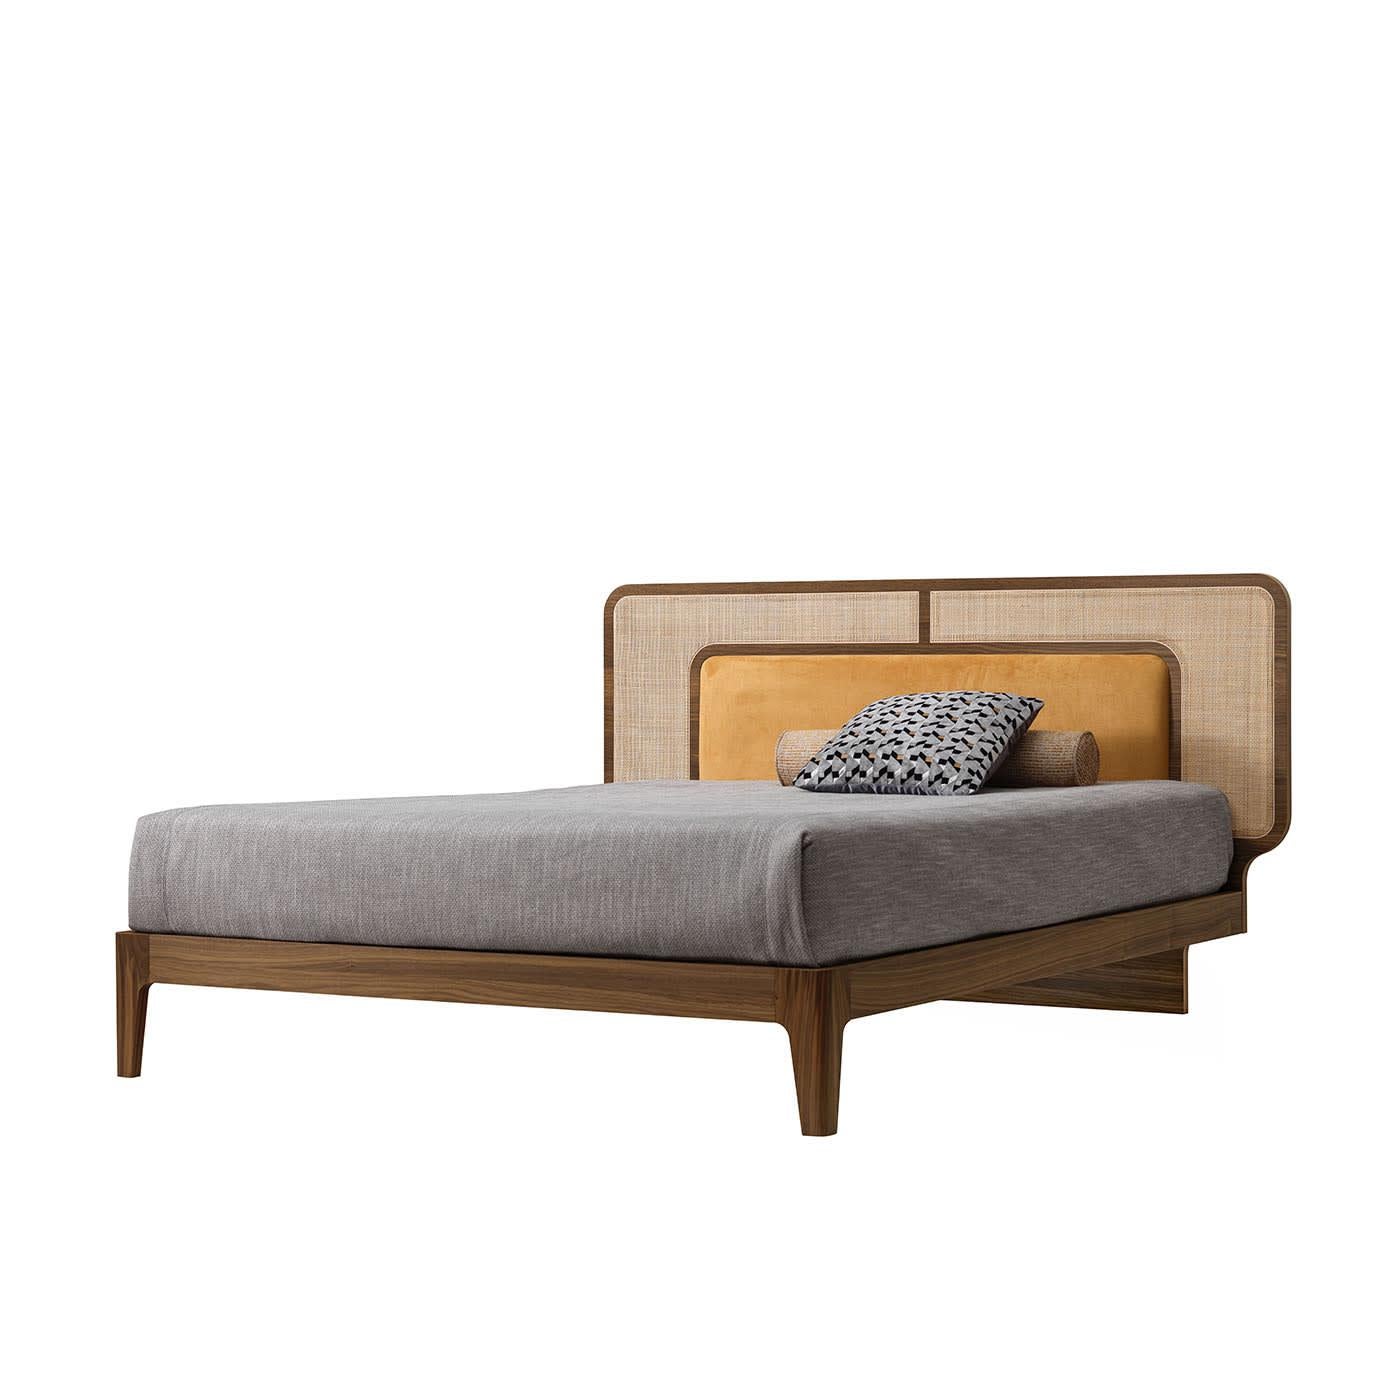 This double bed is a clever combination of silhouettes and textures. The sturdy Canaletto walnut structure, enhanced with Havana stain, also comprises the rounded profiles encircling the headboard, where Vienna straw embraces an insert of